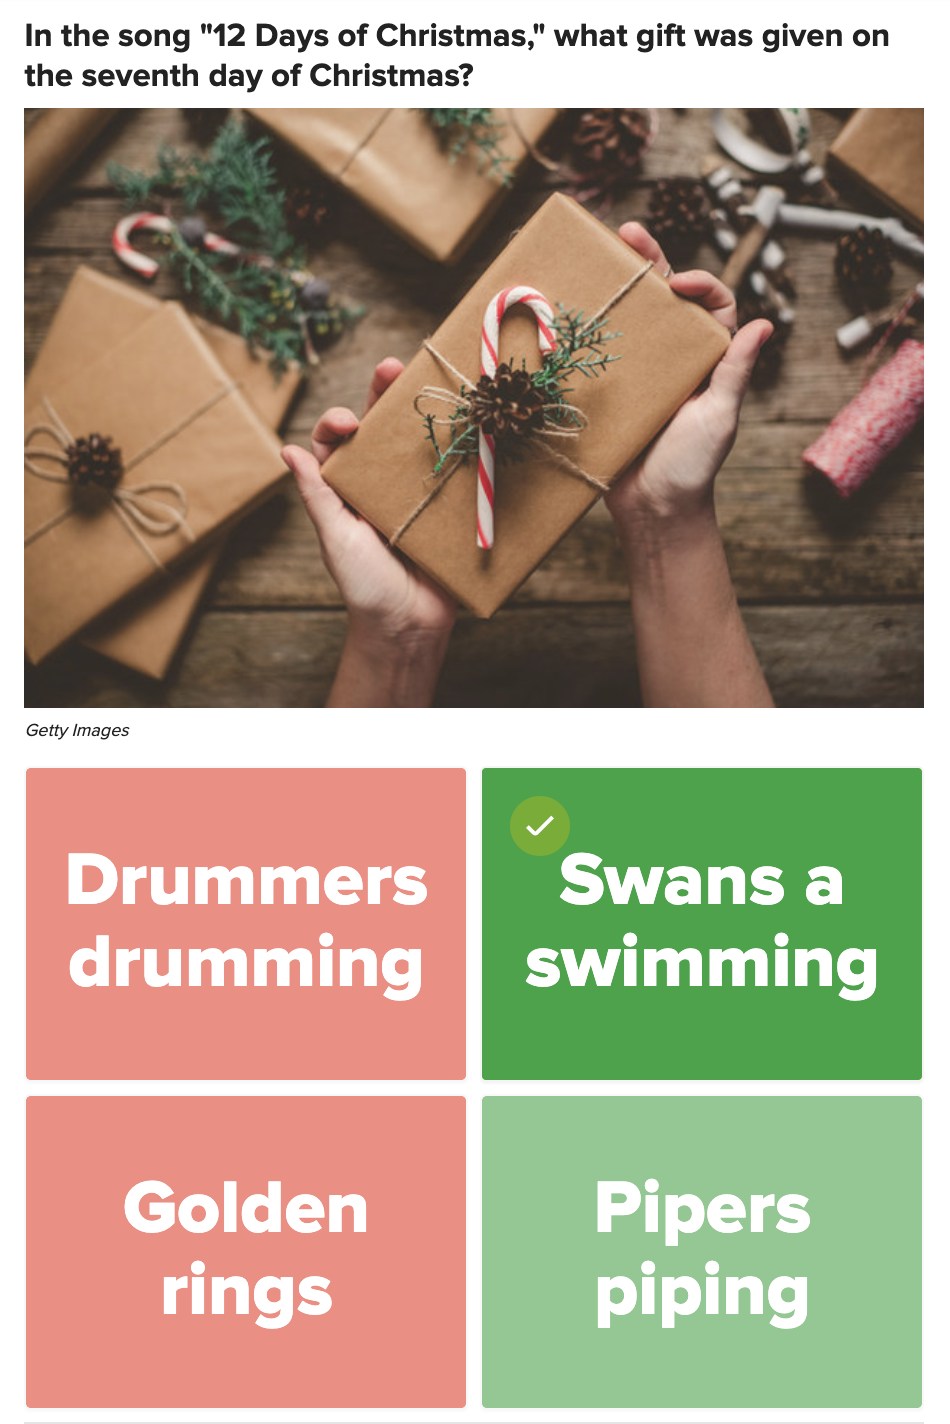 Question: In the song &quot;12 Days of Christmas&quot; what gift was given on the seventh day? Answers: Drummers drumming, swans a swimming, golden rings, or pipers piping